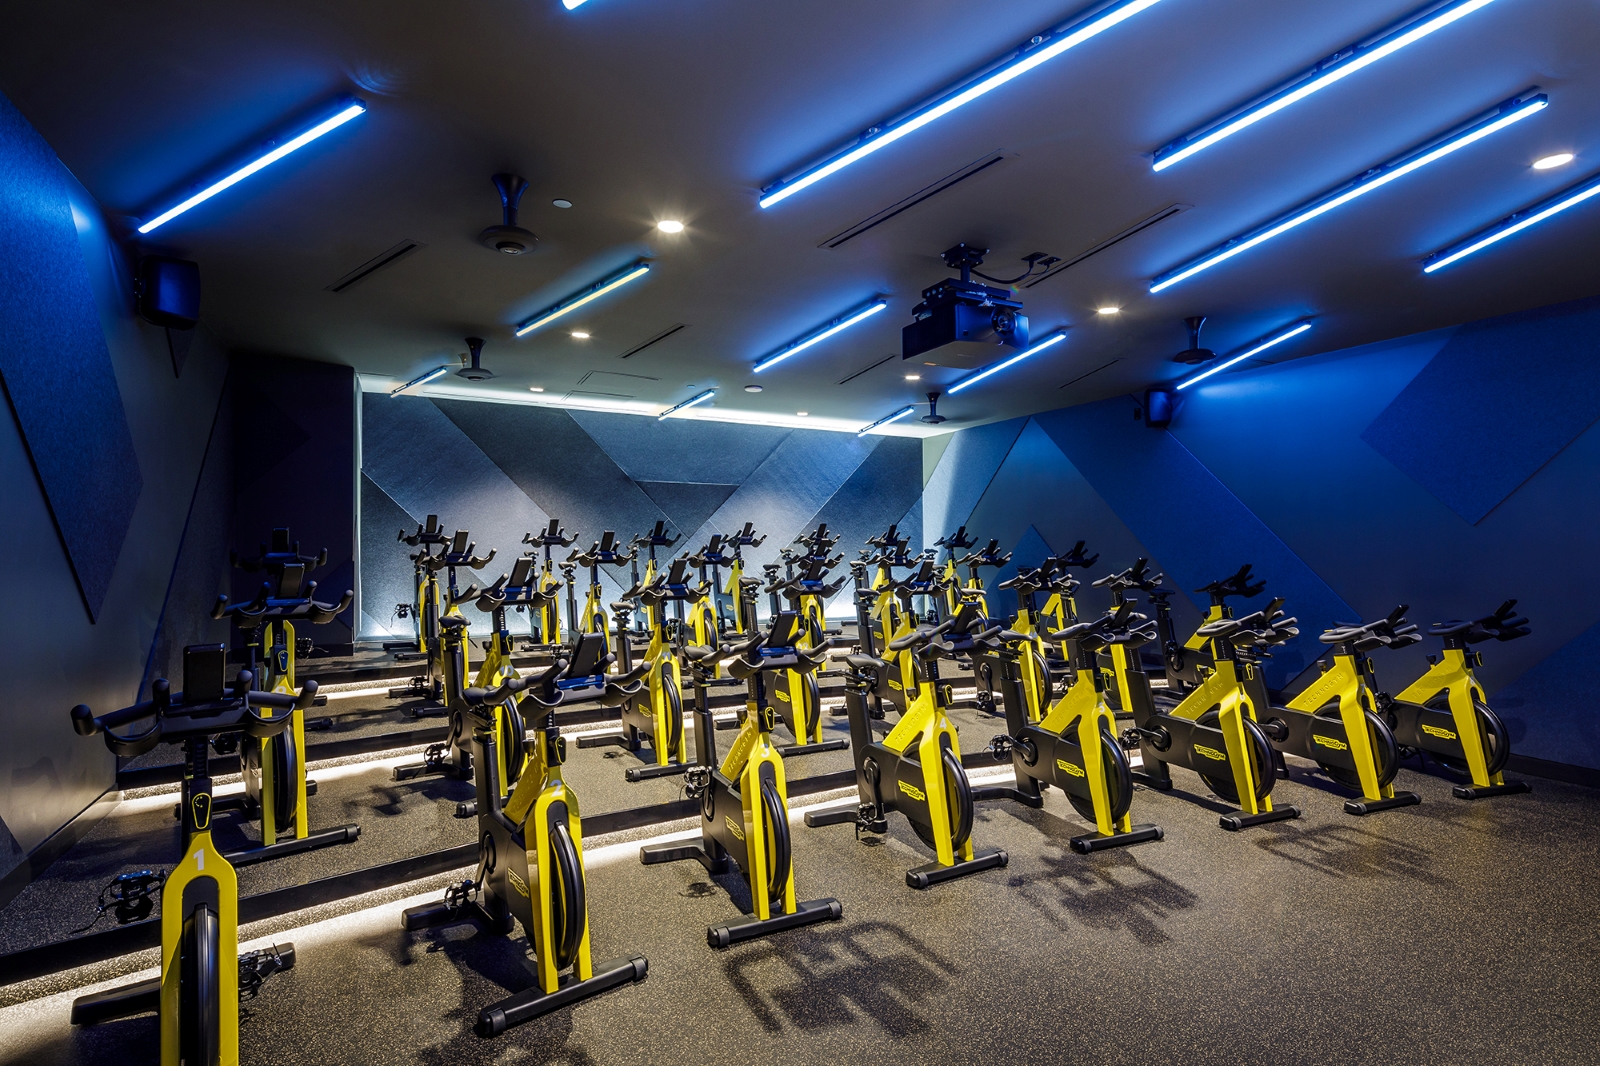 Gym, , Altea Active in Vancouver BC, by Cutler